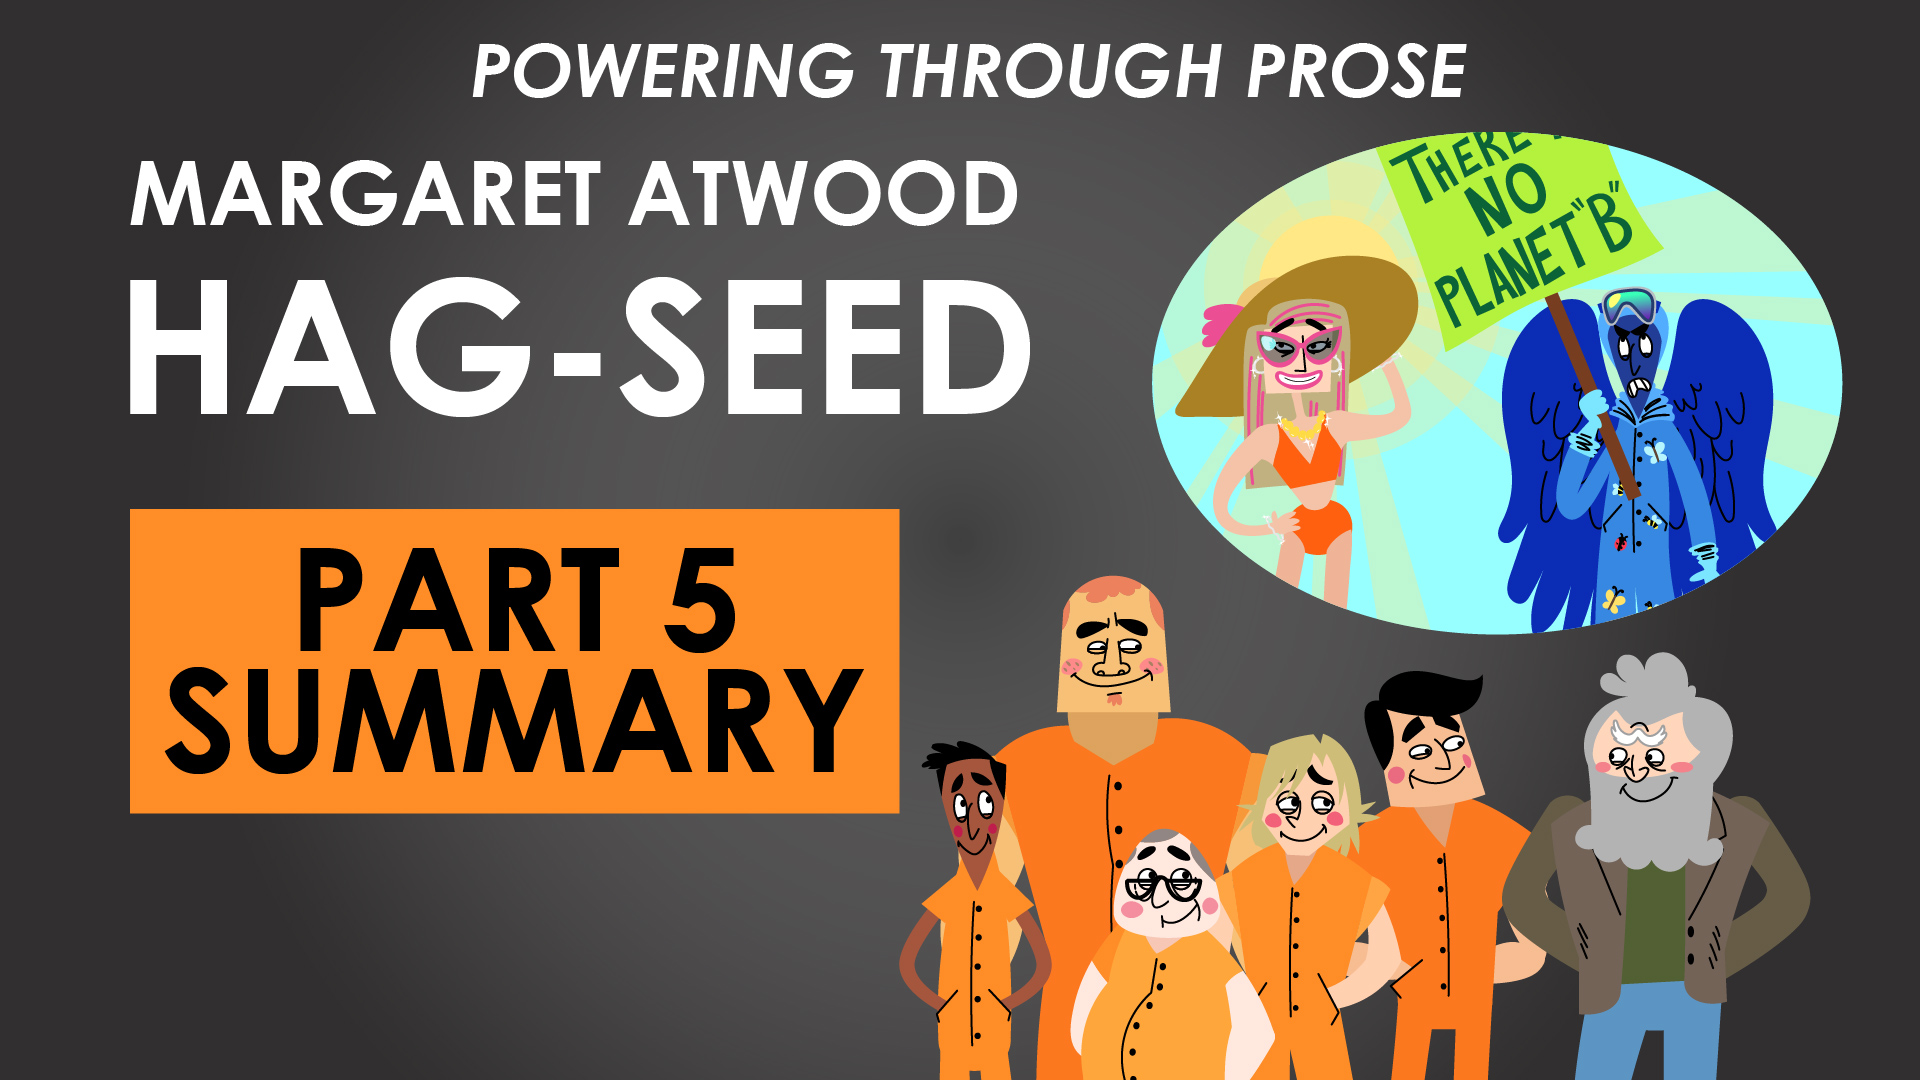 Hag-Seed - Margaret Atwood - Part 5 Summary - Powering through Prose Series